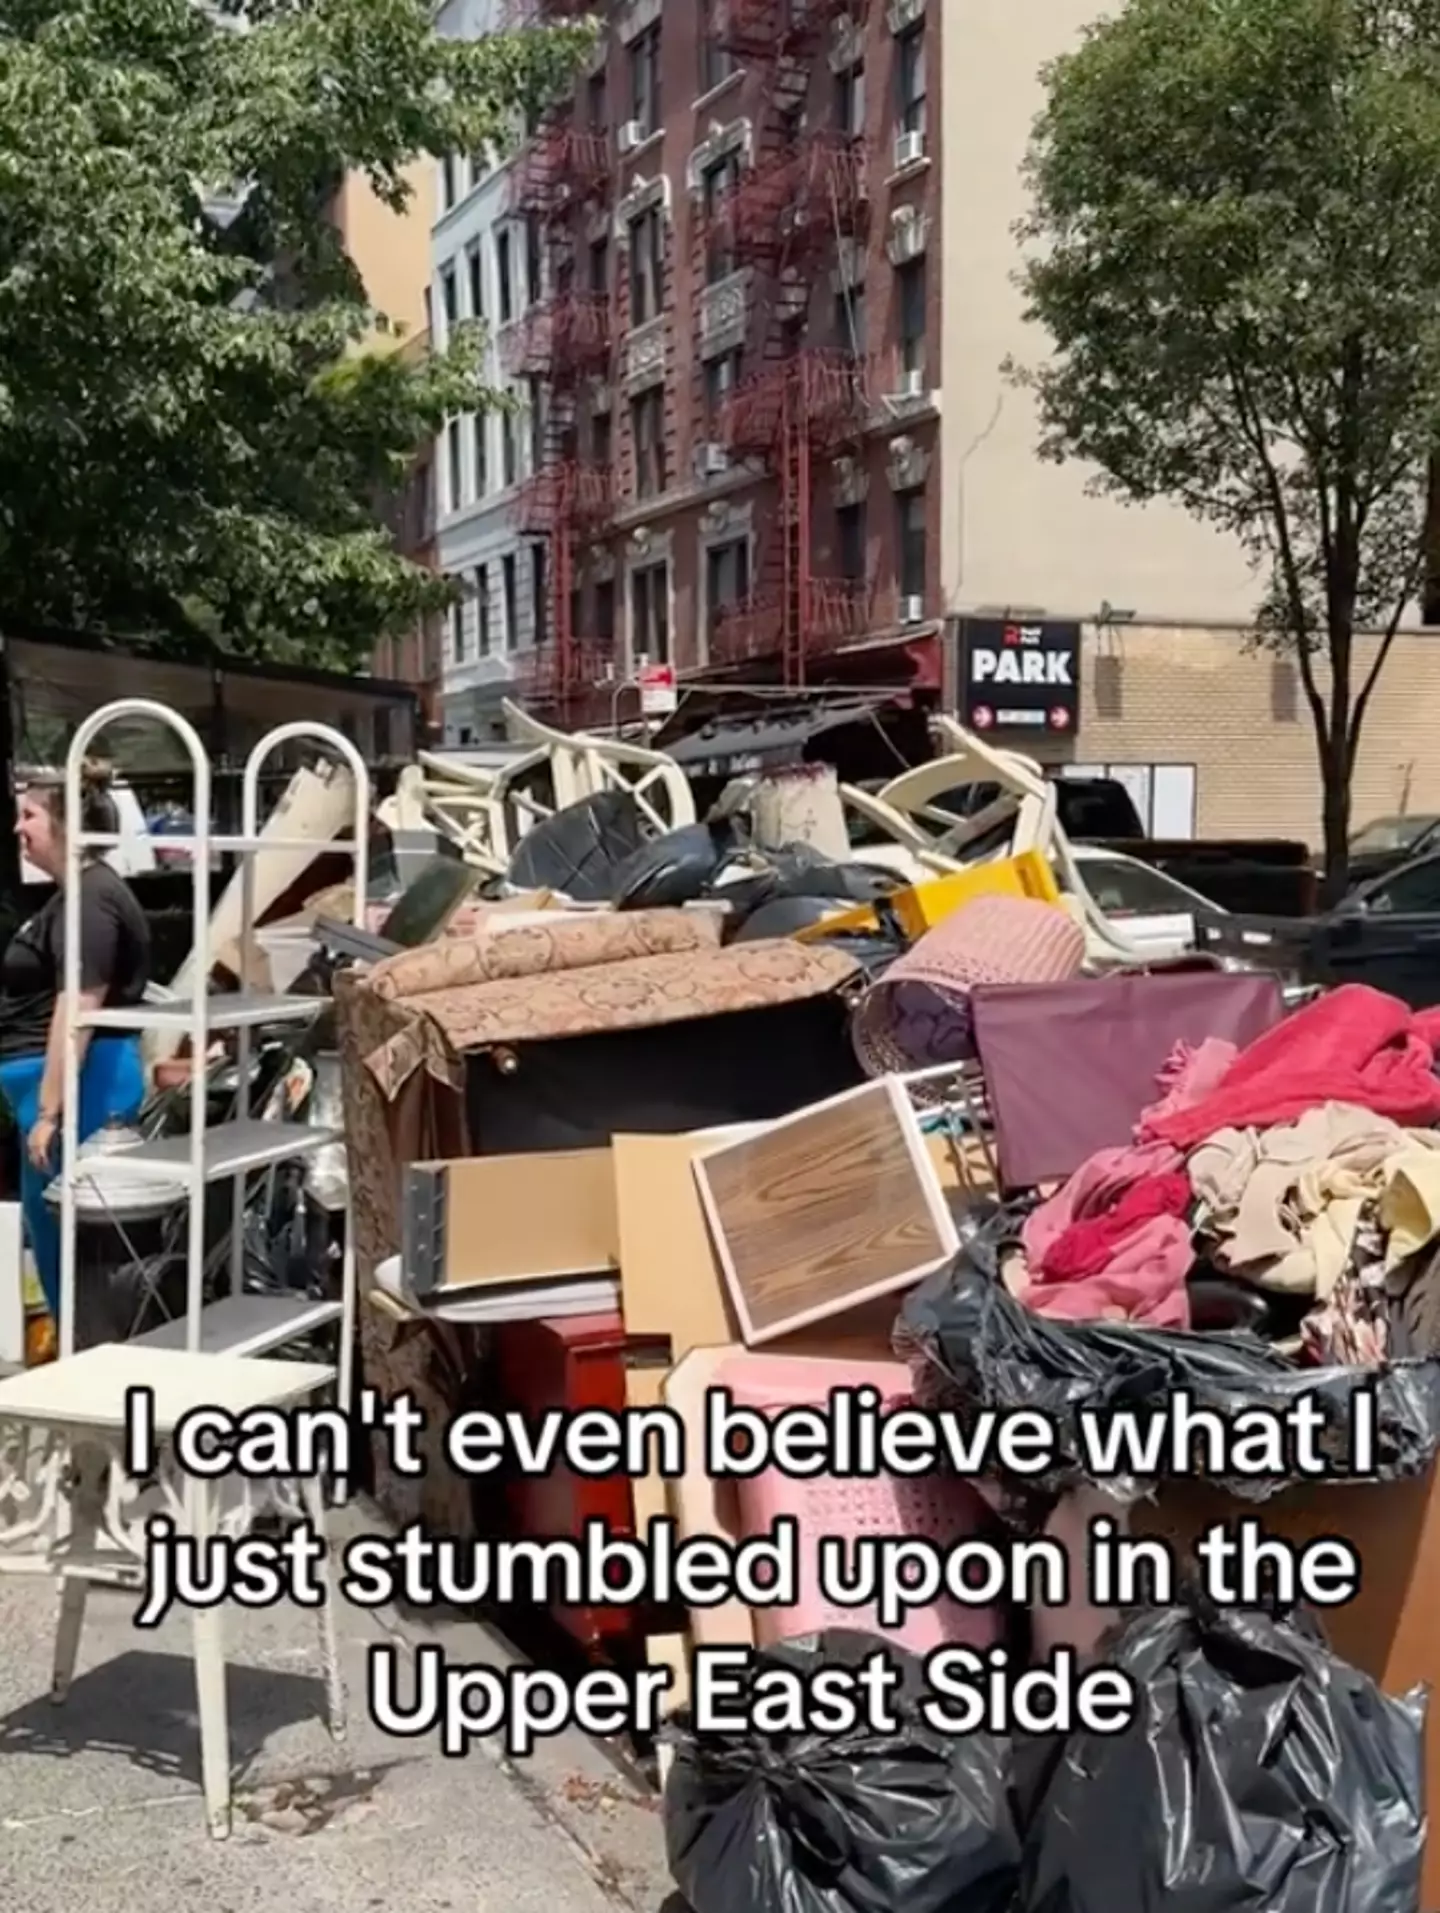 Nichole was walking through the city’s Upper East side when she found a massive mound of household items on the street. (TikTok/@nycnichole)